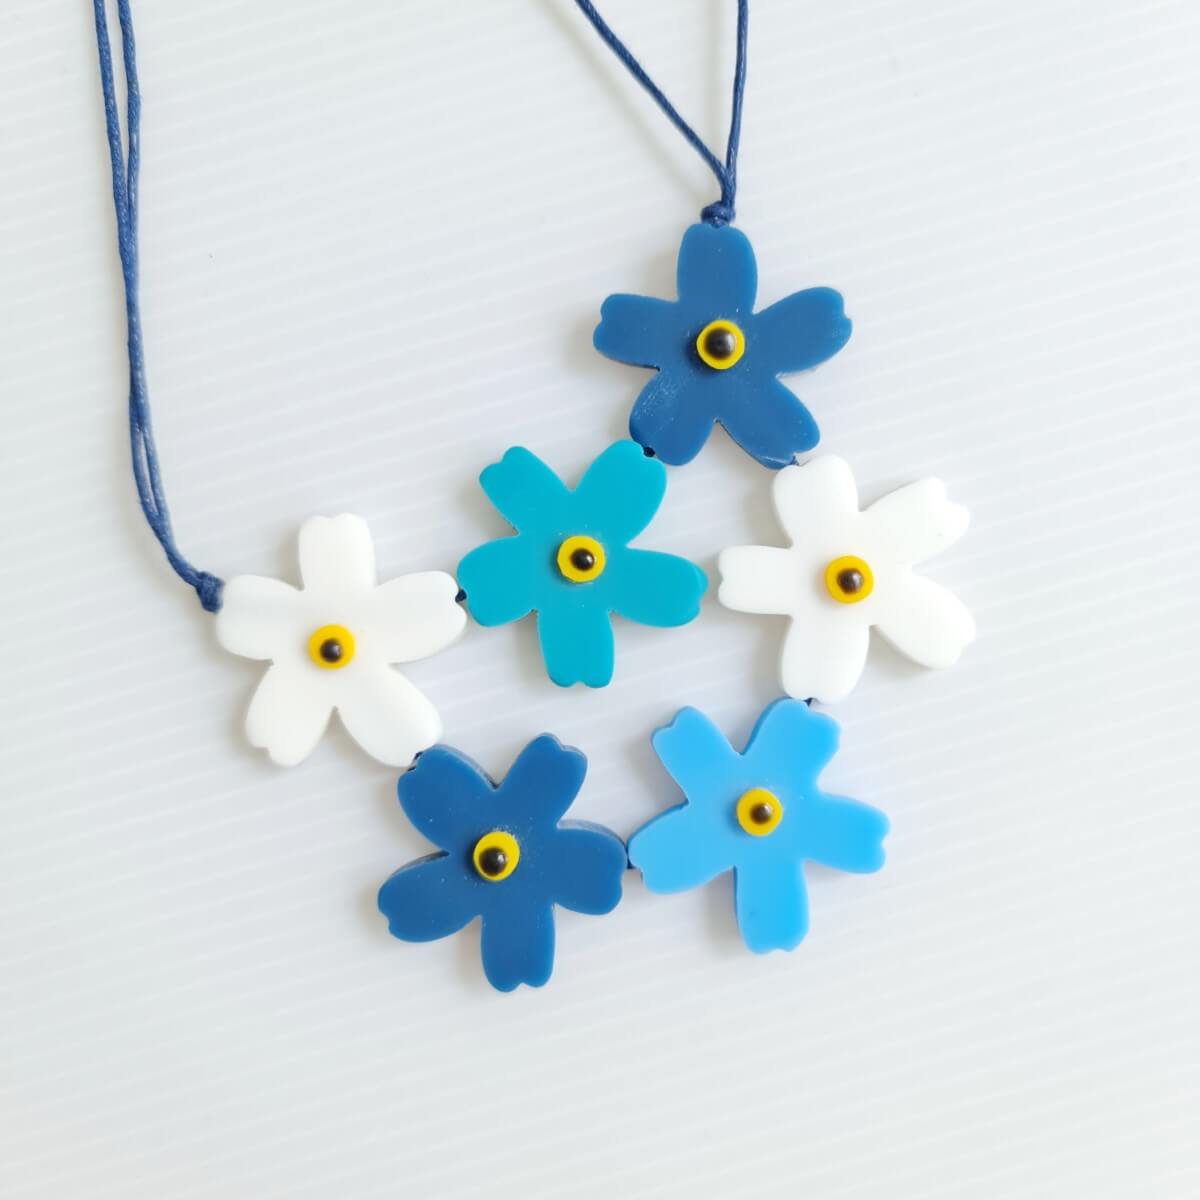 Forget Me Not Blue Necklace